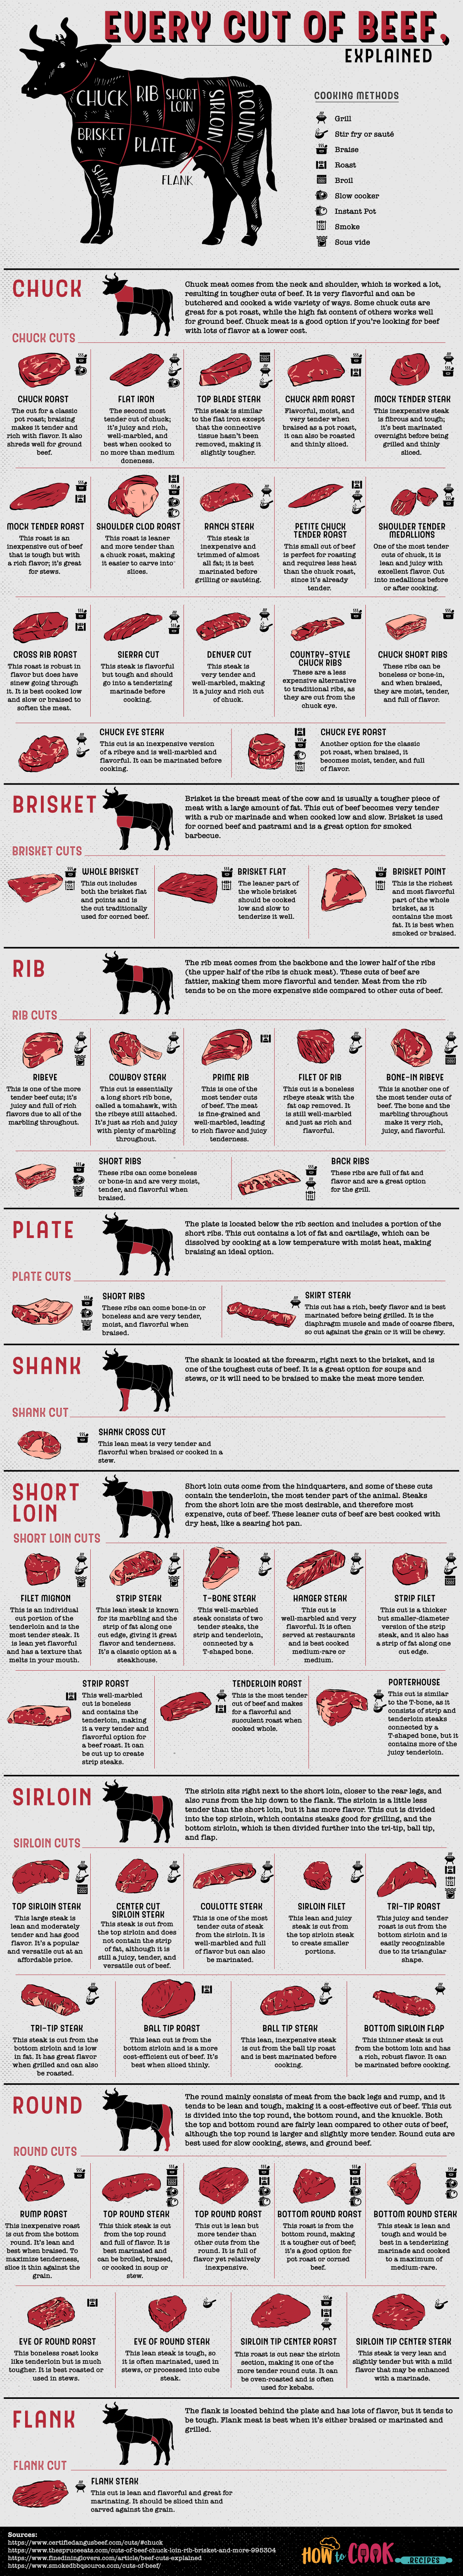 Every Cut of Beef, Explained - Infographic